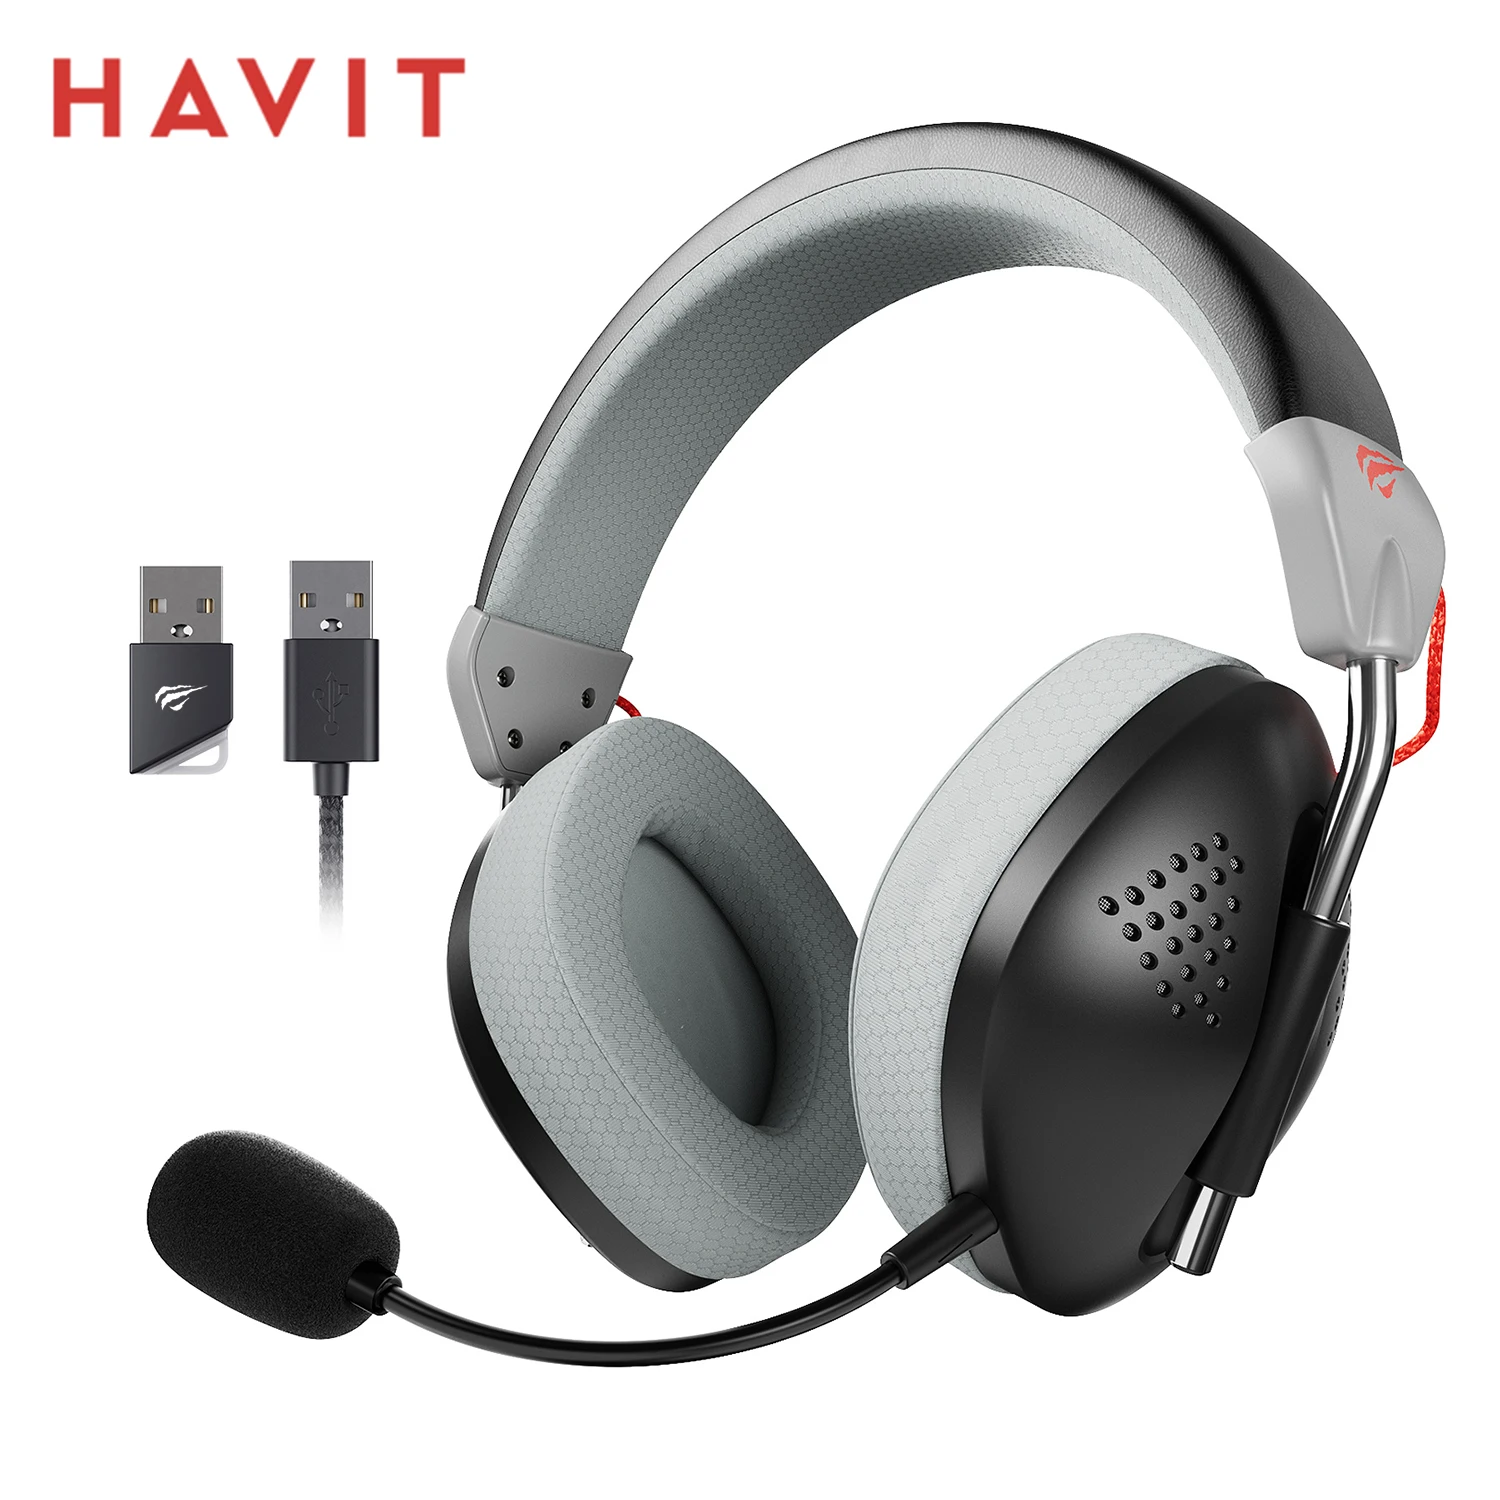 HAVIT Fuxi-H4 Wireless Gaming Bluetooth Headphones 2.4GHz Wireless Headset With Pluggable Mic For PC Laptop PS4 PS5 Switch Gamer